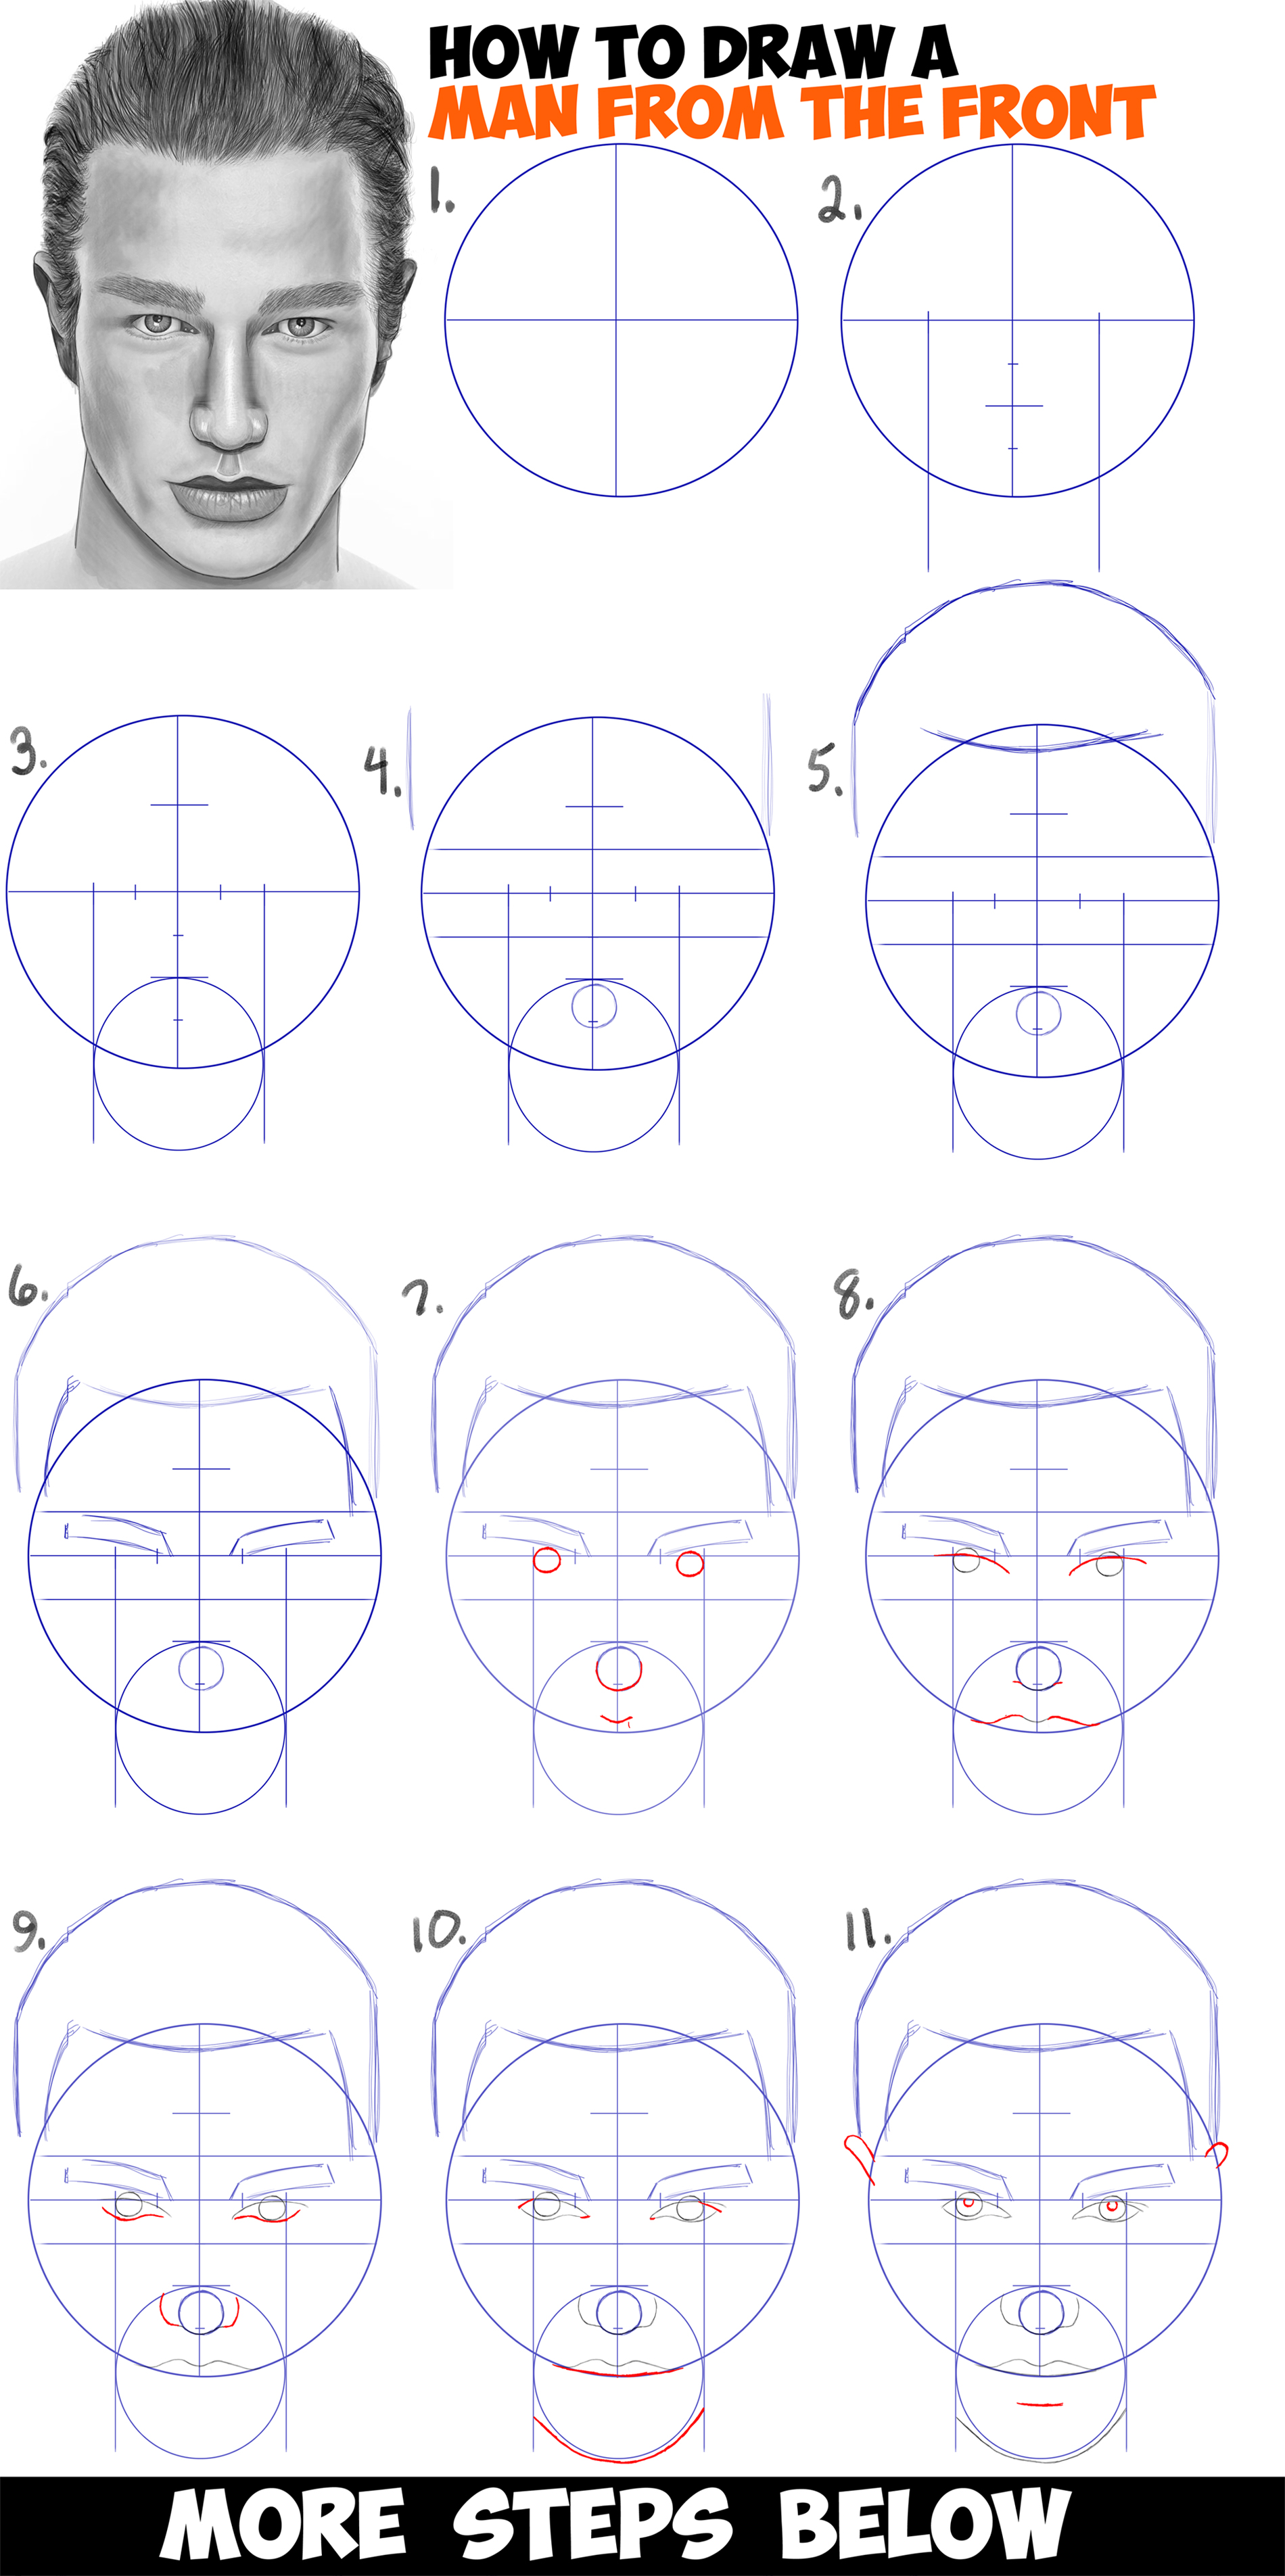 How to draw a portrait, teach me how to draw, pencil portraits from photos,  easy pencil drawings by independent - Issuu